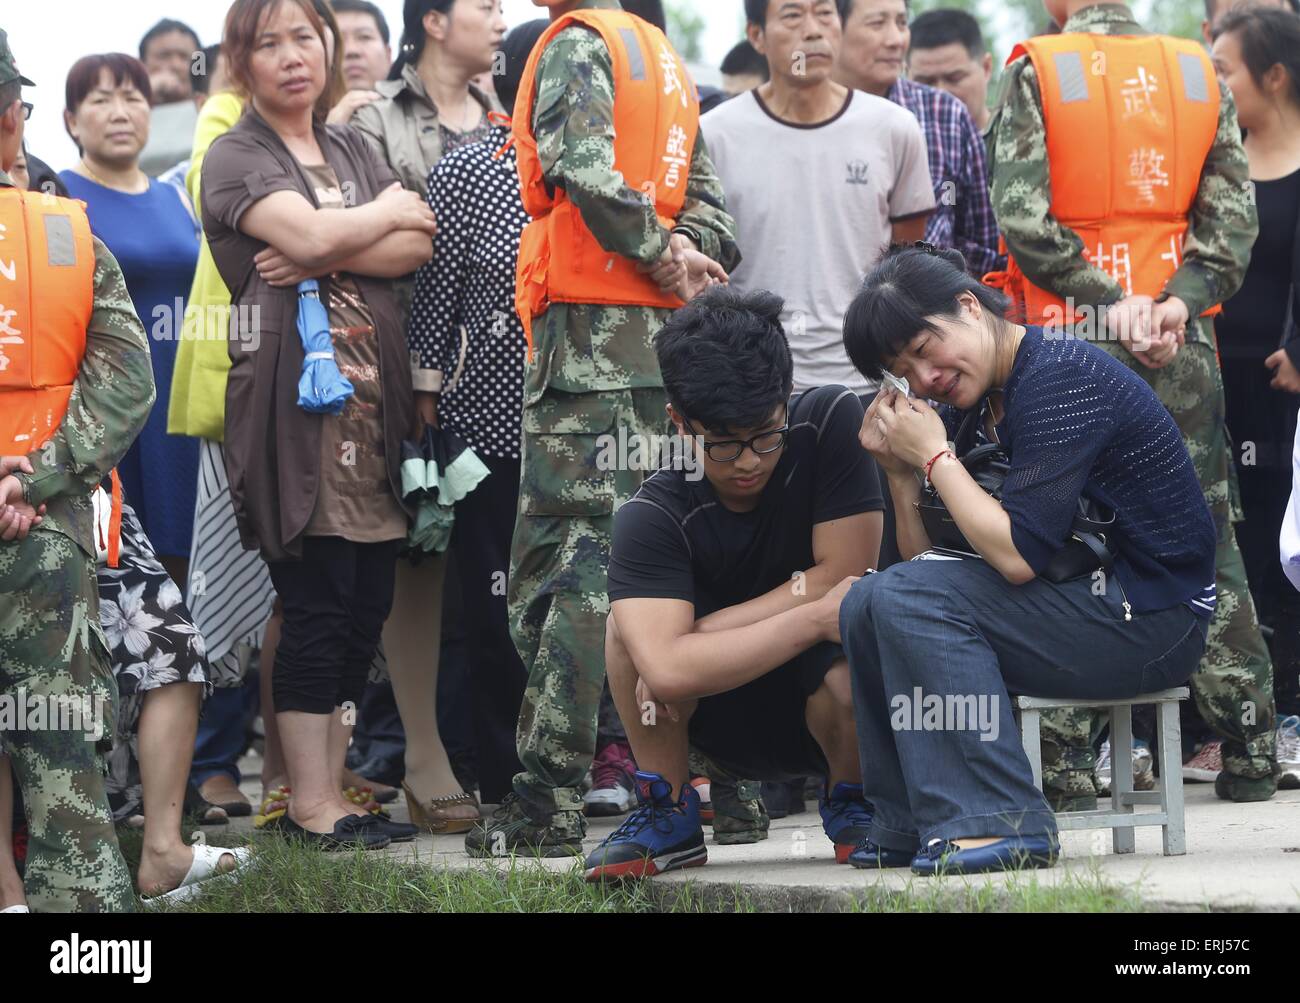 Jianli, China. 03rd June, 2015. Relatives of the travellers in the sank ship "Eastern Star" on the bank of the Yangtze River are waiting for the new message for recurring in Jianli county, Hubei province, central China, 3th June 2015. The ship, Carrying 406 passengers, five travel agency workers and 47 crew members, sank at around 9:28 p.m. (1328 GMT) on Monday,  according to the Xinhua News Agency Said. Credit:  Panda Eye/Alamy Live News Stock Photo